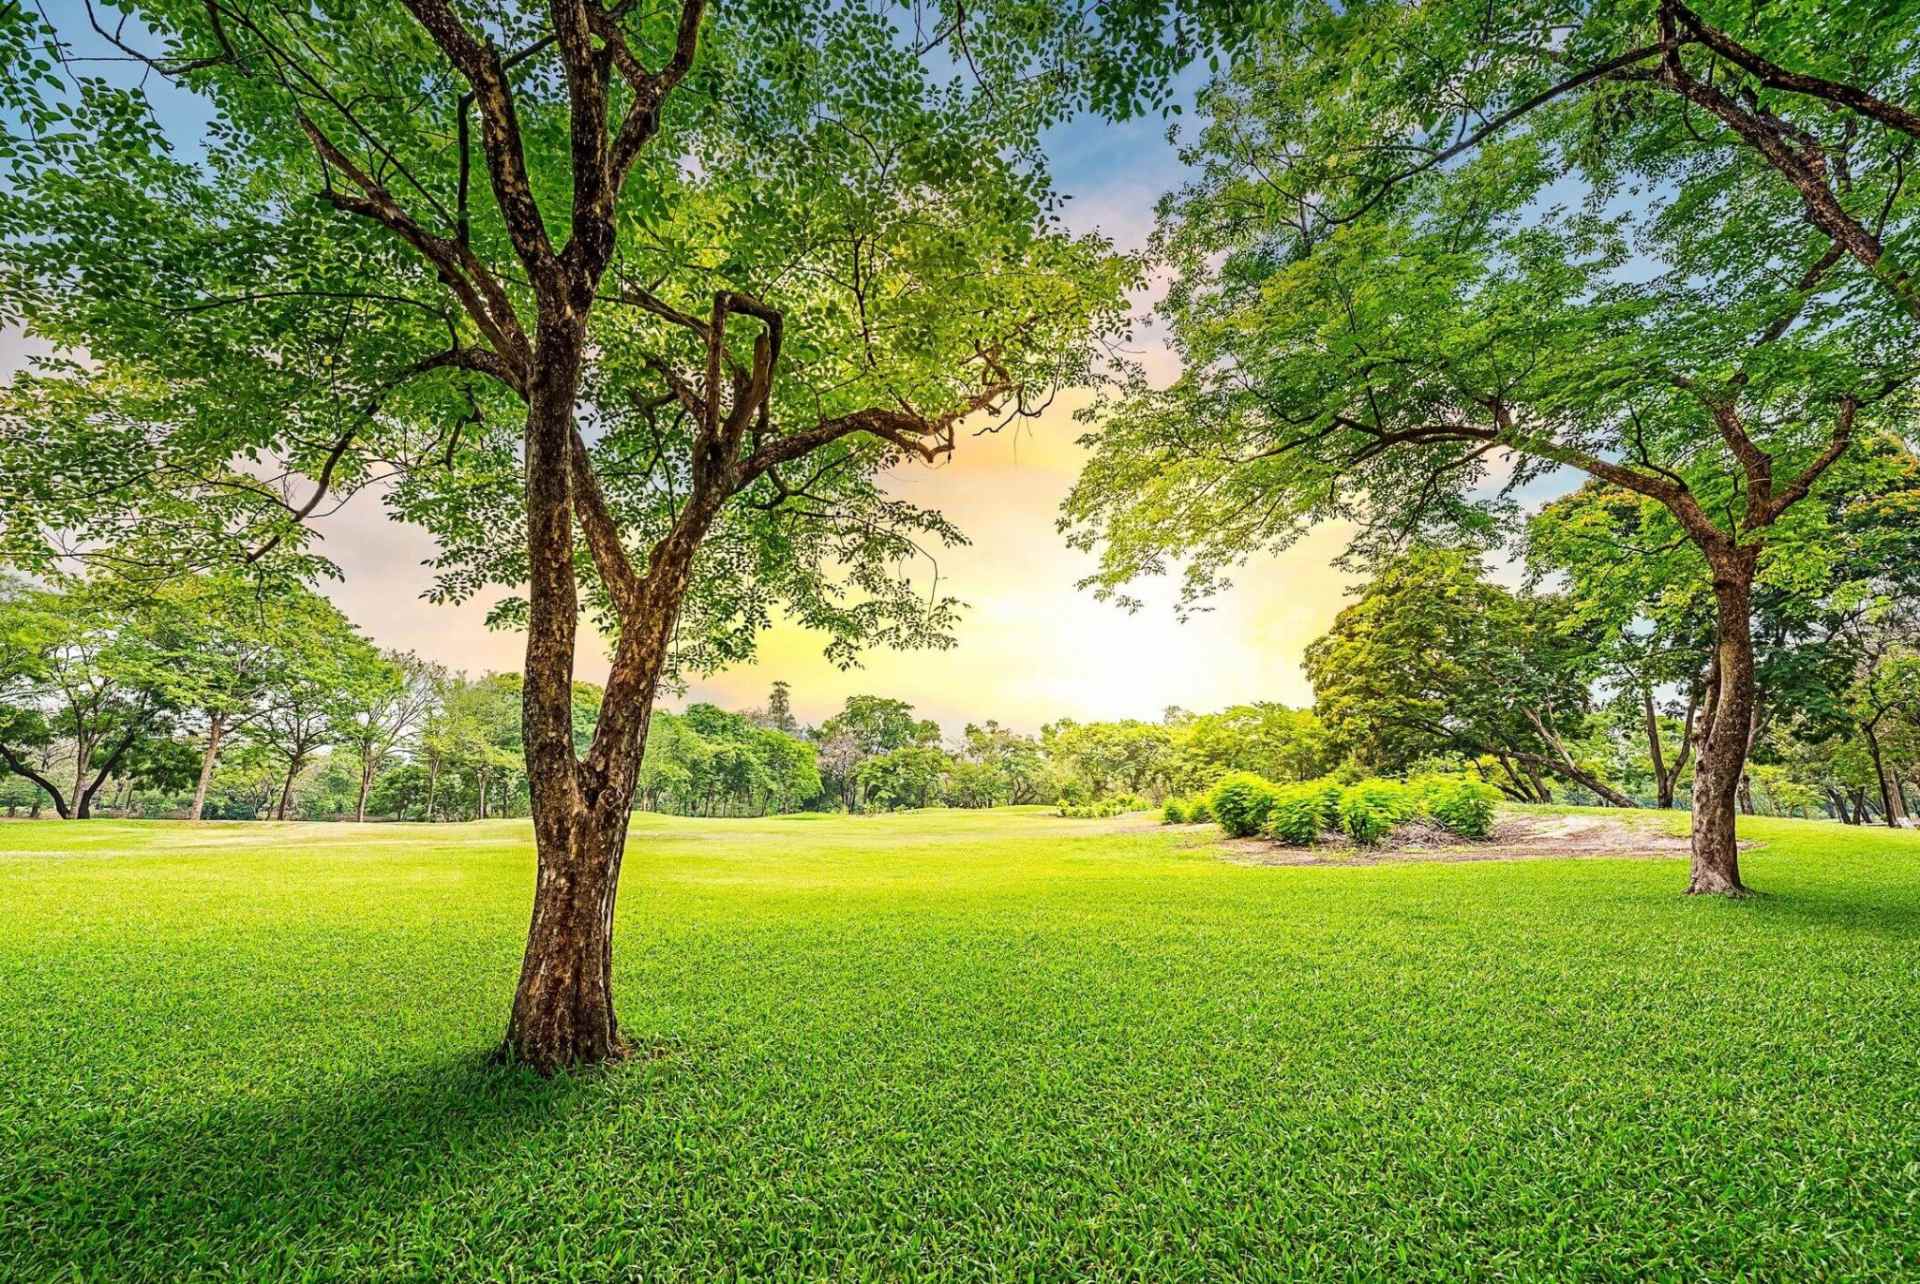 A tree in the middle of a field with grass.